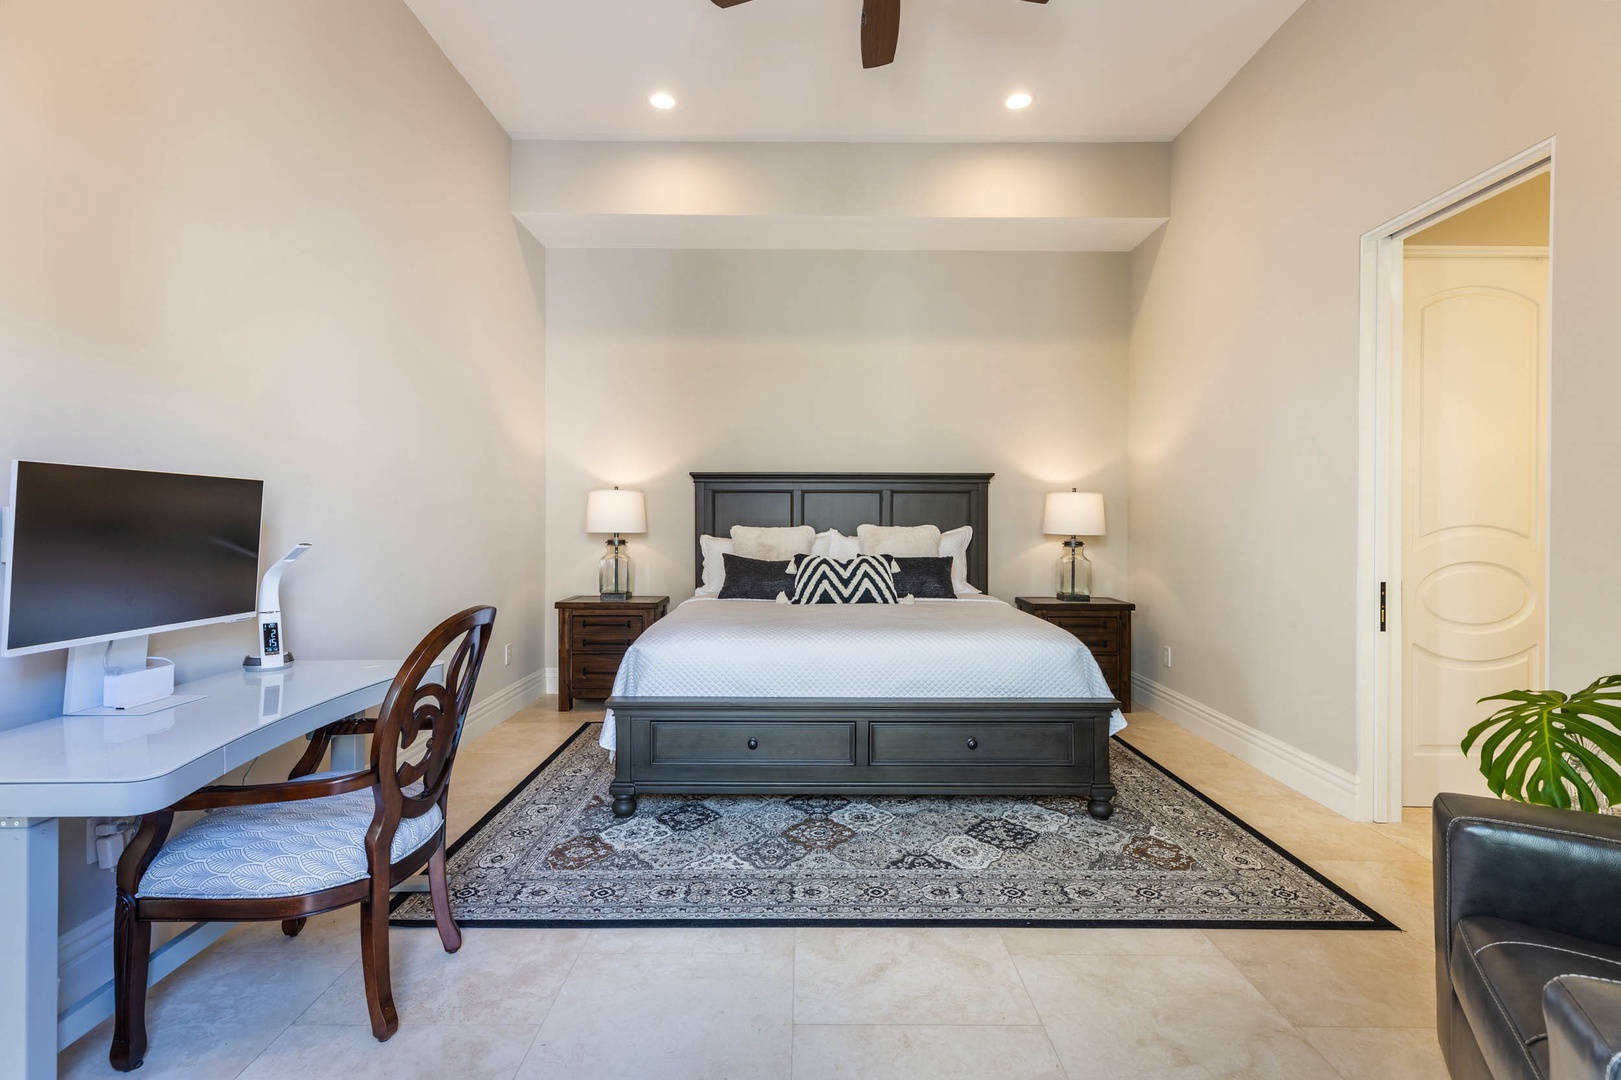 Honolulu Vacation Rentals, Royal Kahala Estate - Guest bedroom with a king bed and a dedicated home office space.